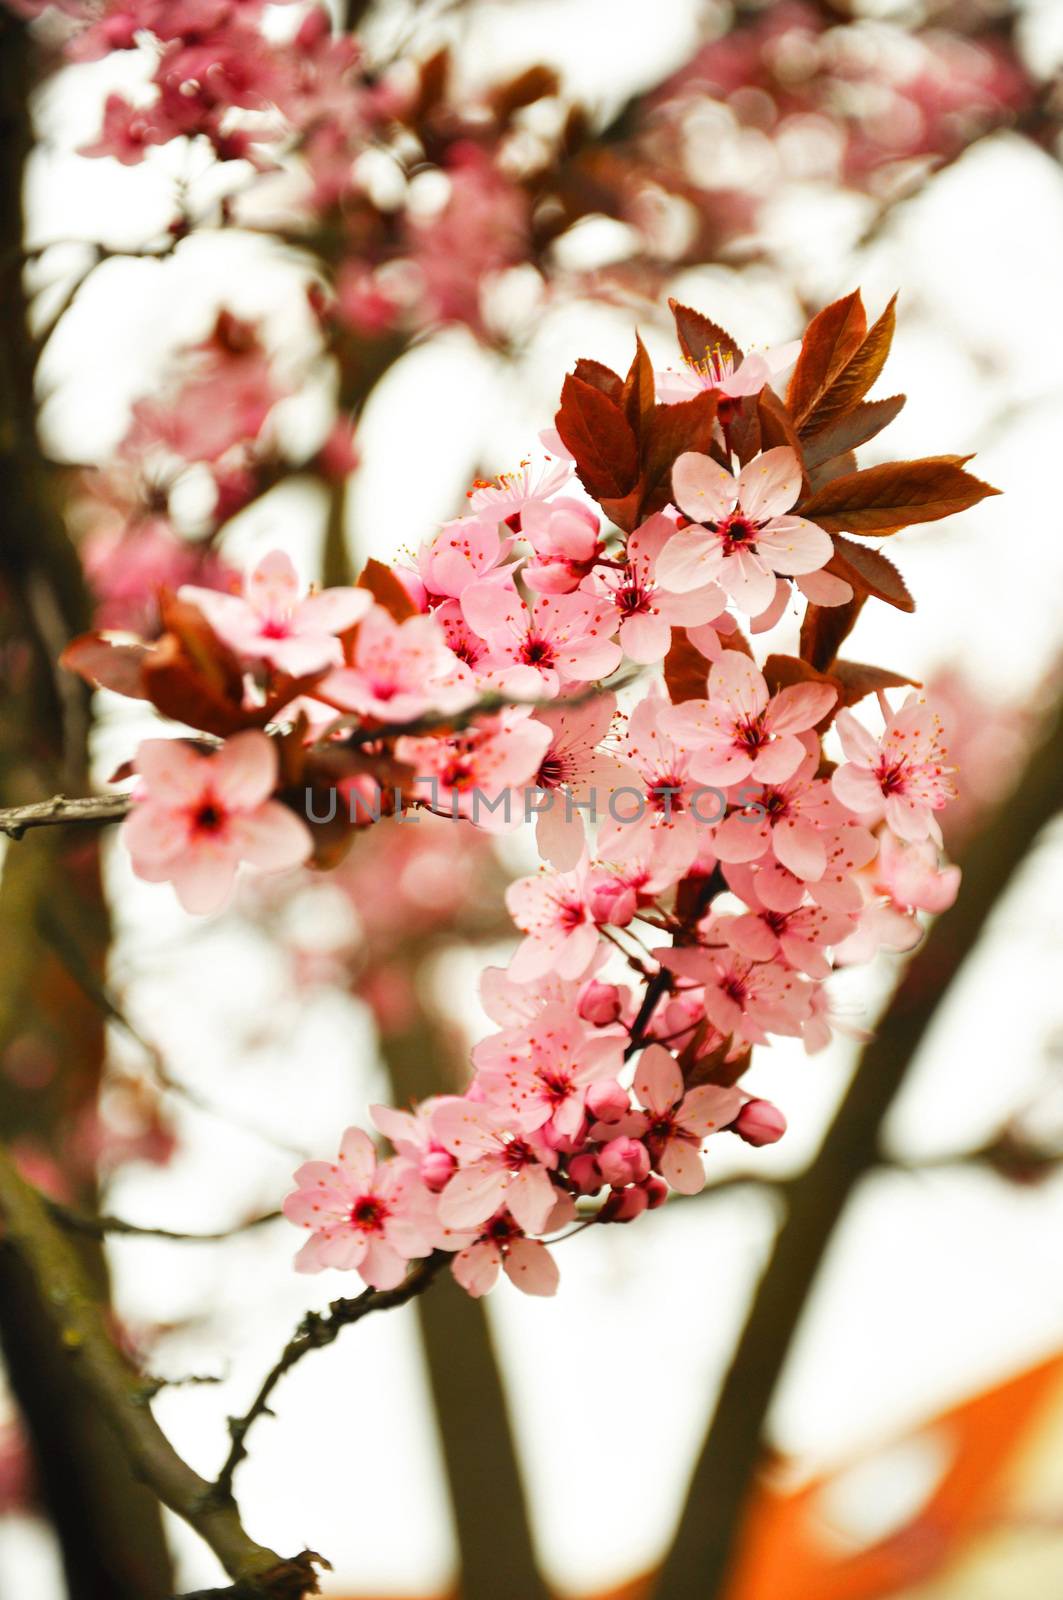 Paradise blooming pink apple flowers in spring by Eagle2308